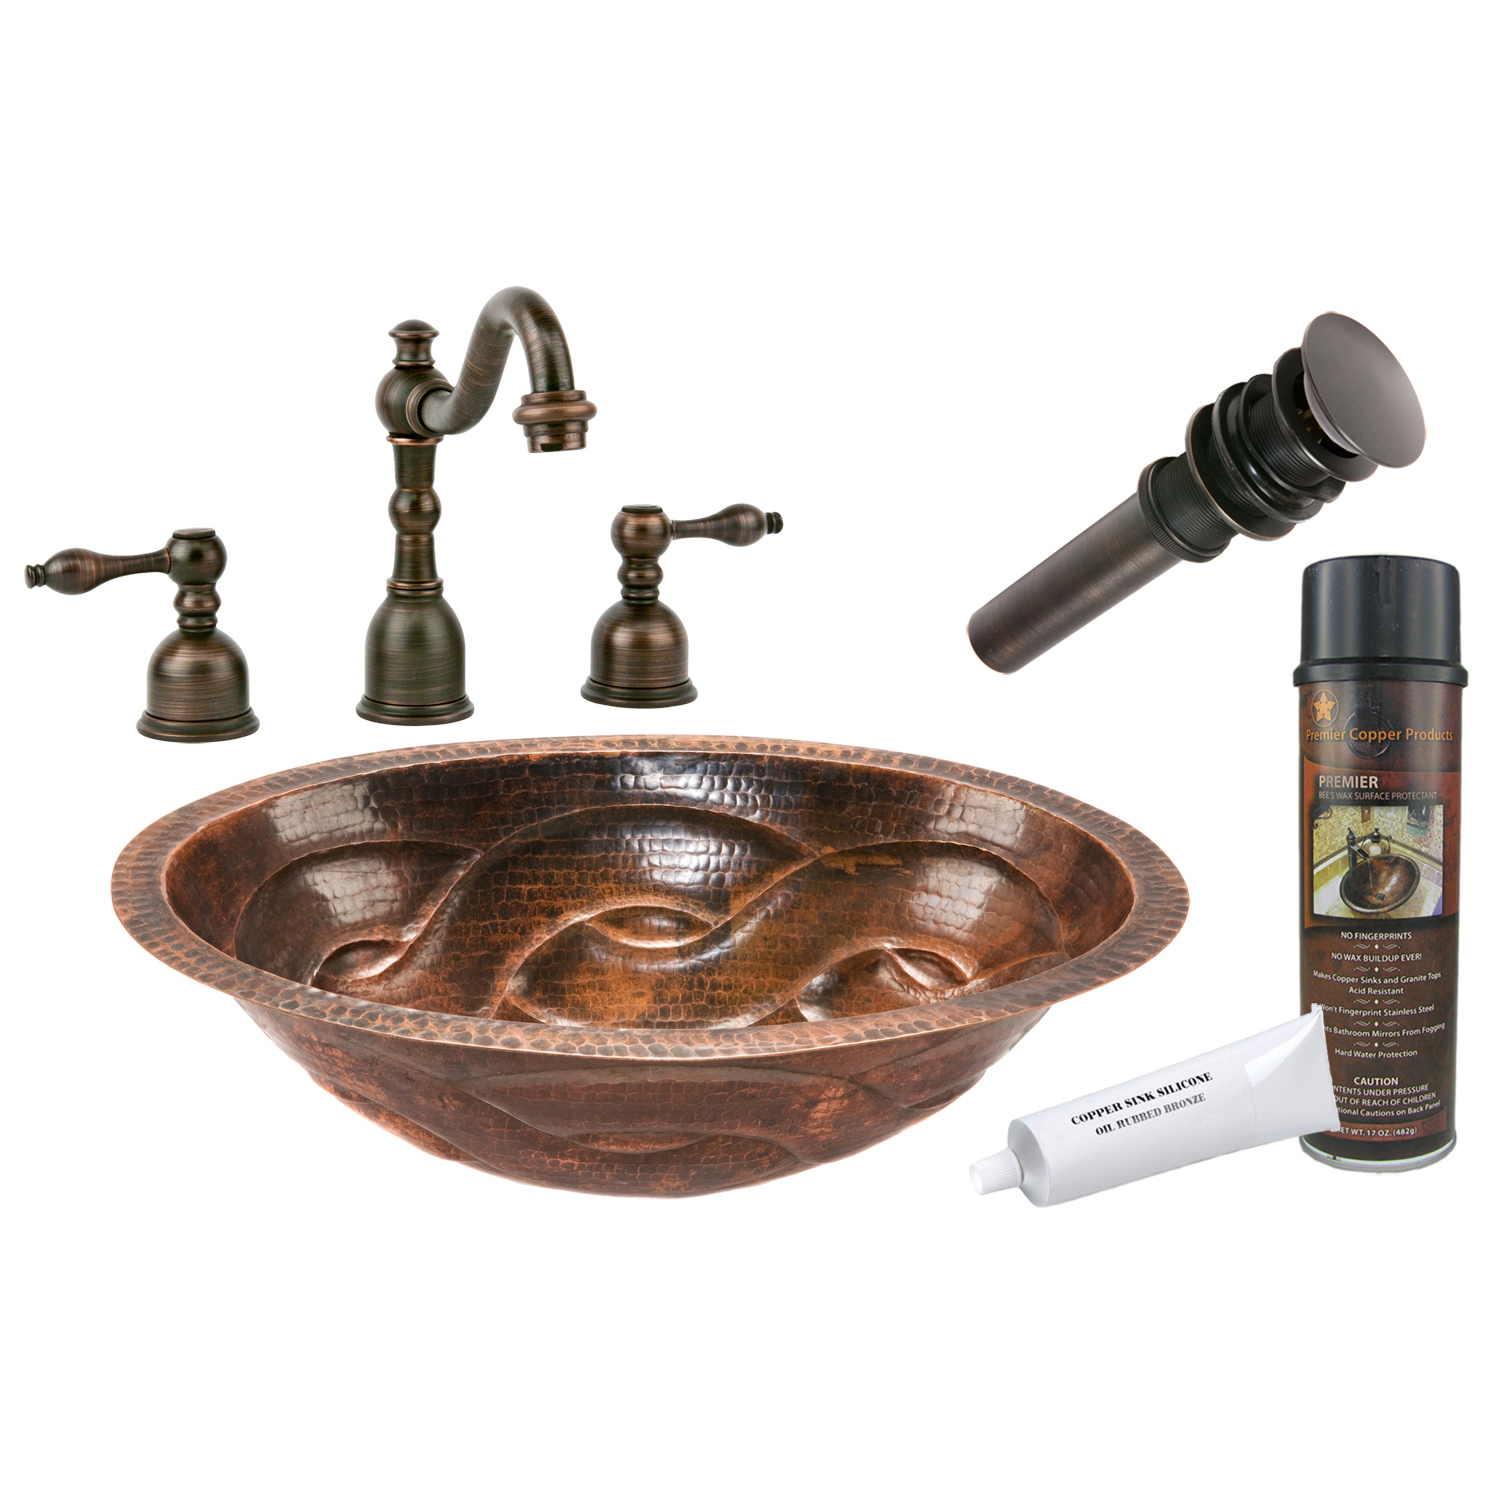 Oval Braid Under Counter Hammered Copper Sink, Faucet And Accessories Package, Oil Rubbed Bronze